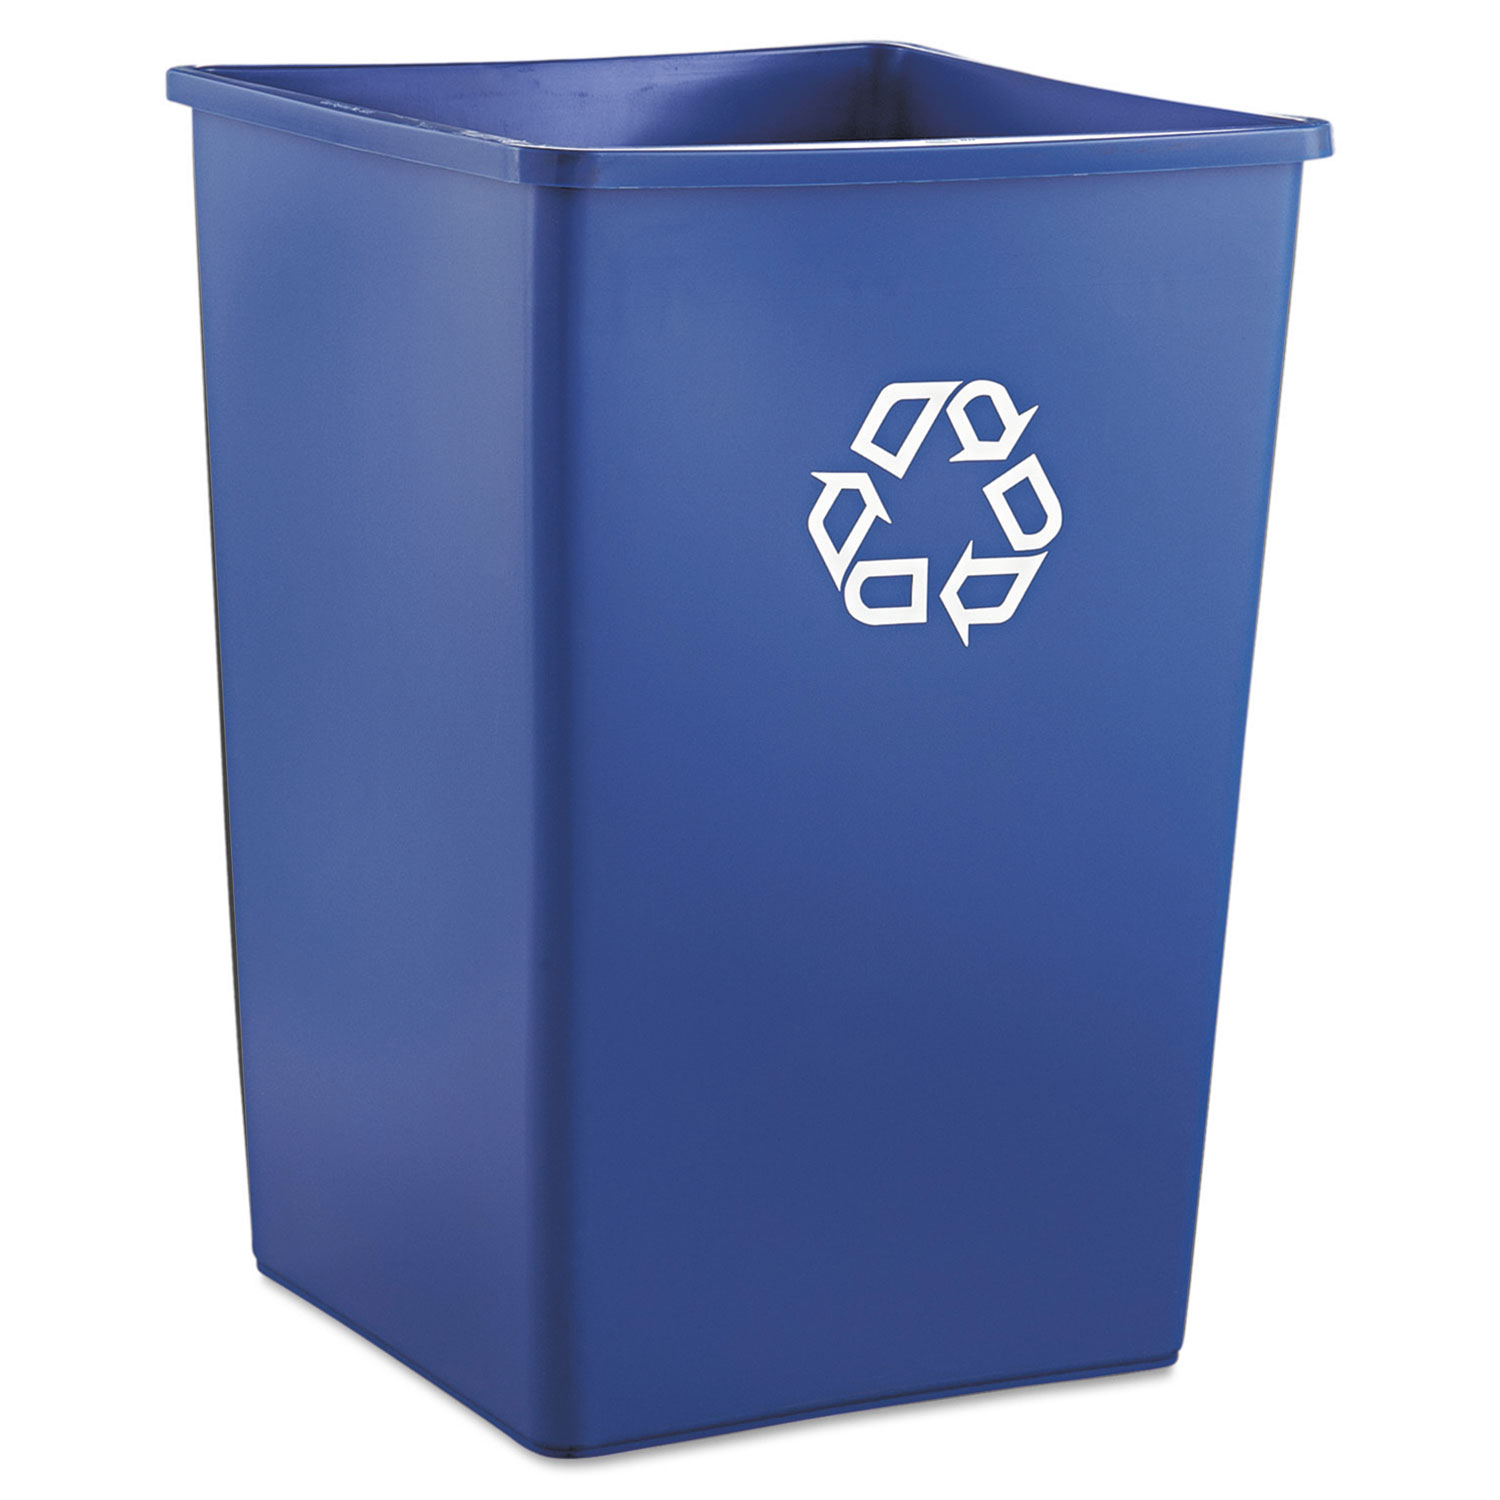  Rubbermaid Commercial 395873BLUE Recycling Container, Square, Plastic, 35 gal, Blue (RCP395873BLU) 